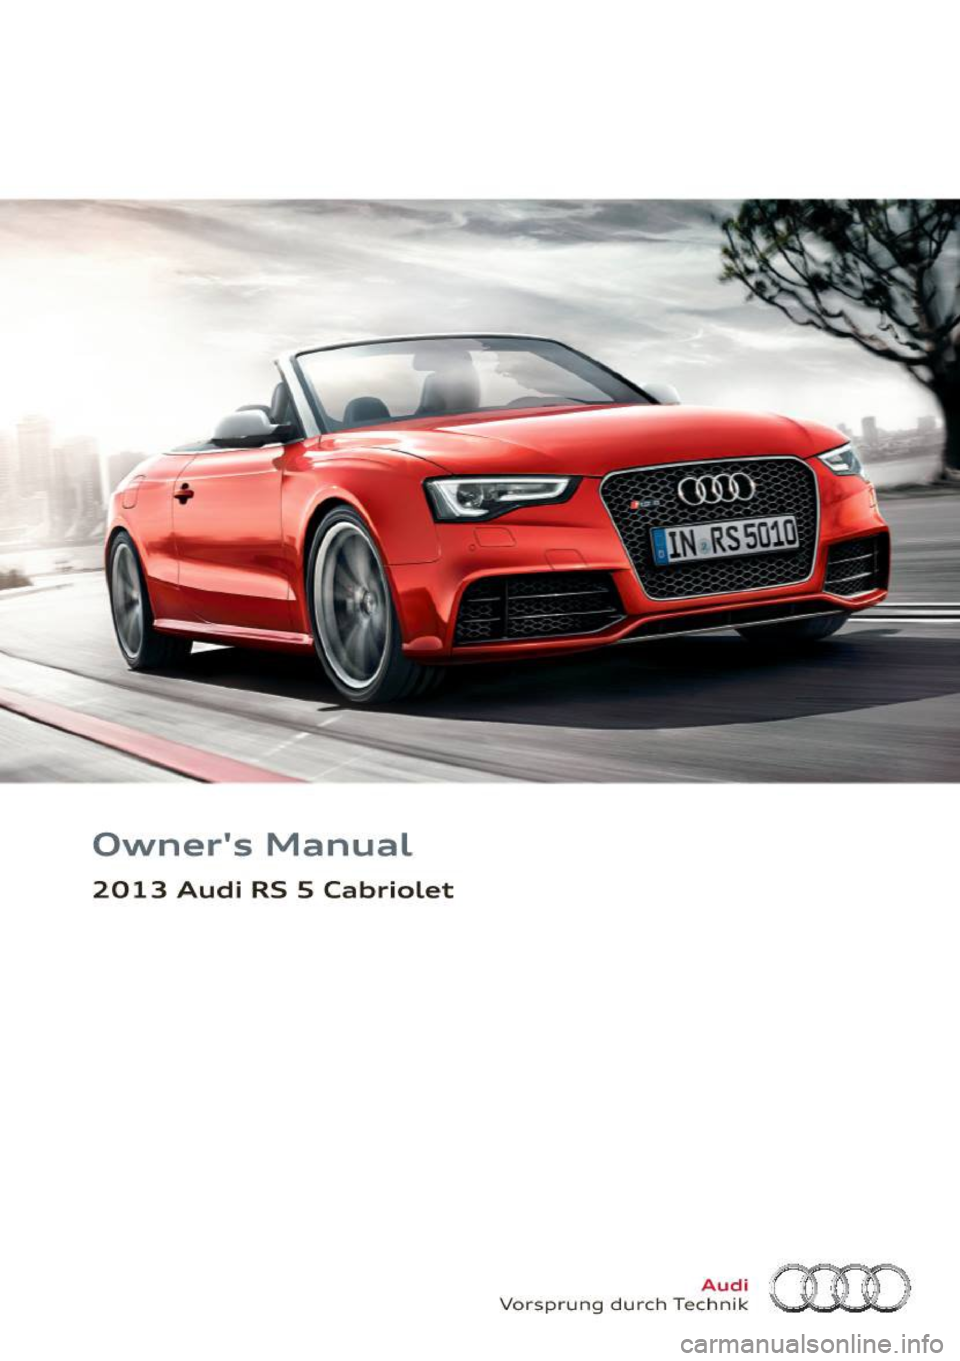 AUDI RS5 CABRIOLET 2013  Owners Manual Owners  Manual 
2013  Audi  RS  5  Cabriolet 
Vorsp rung  du rch  Tec~~f~ (HD  